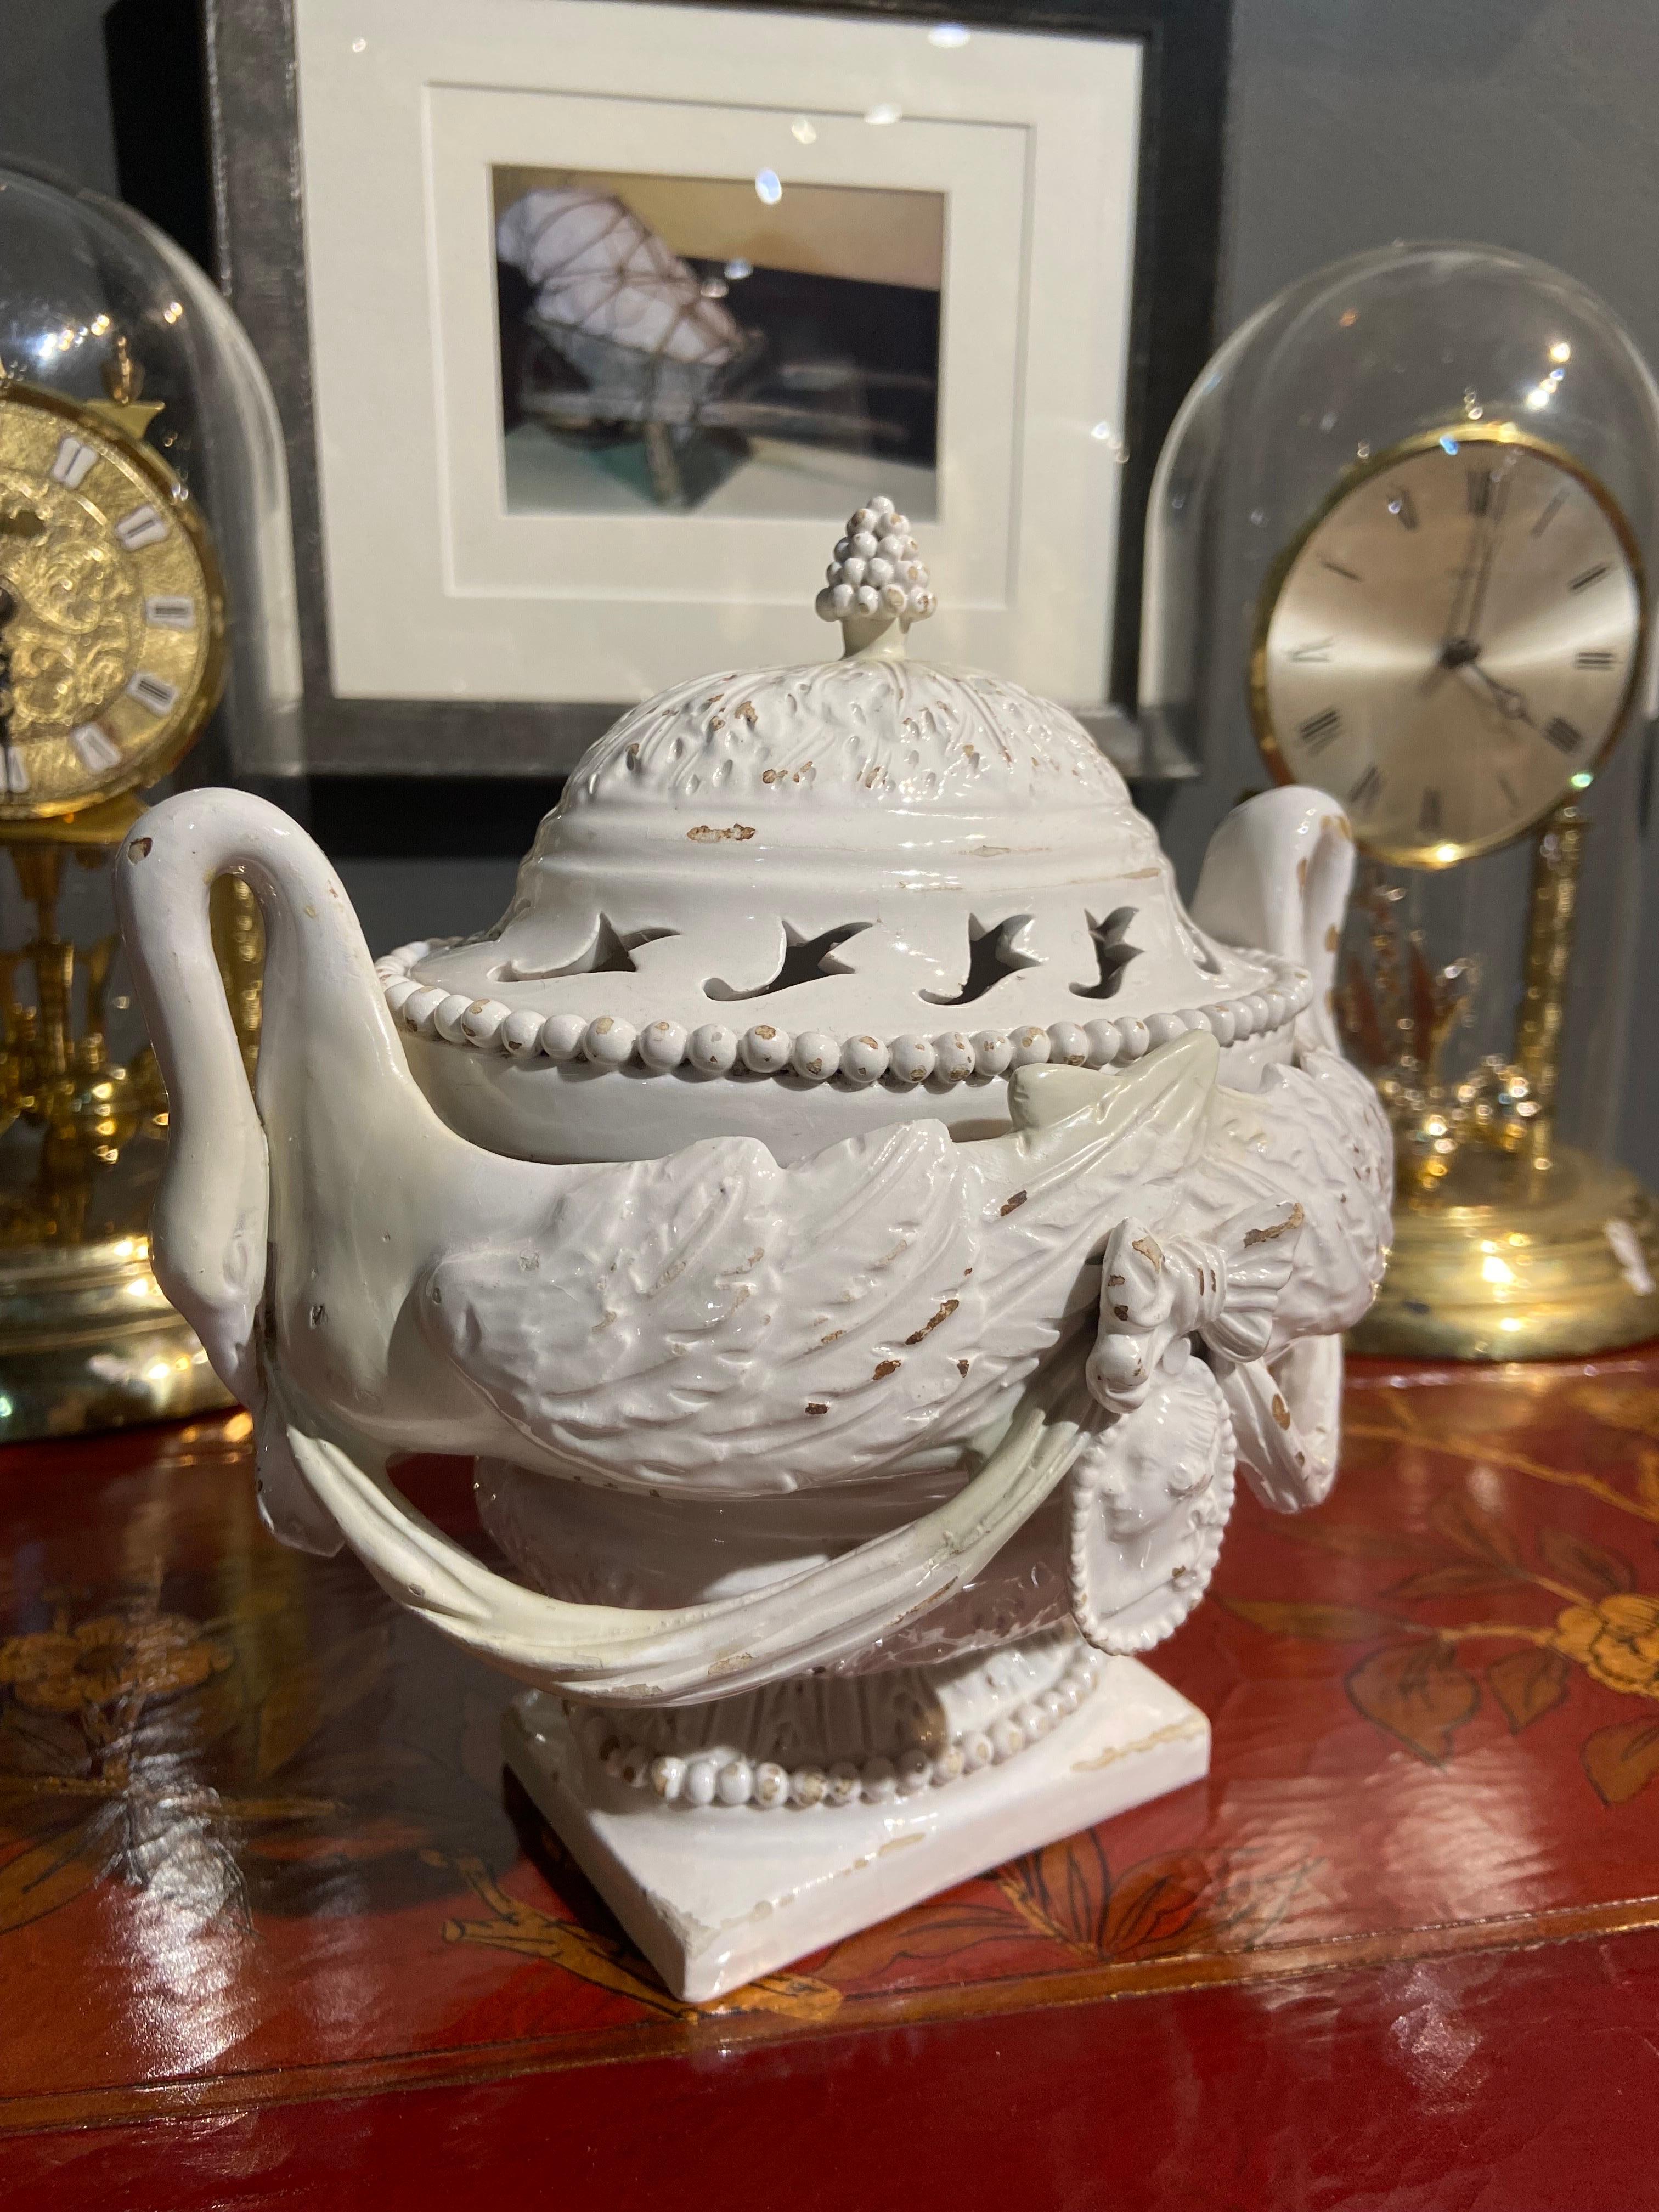 Extraordinary white ceramic centerpiece representing two beautiful swans turned back to each other to form an oval bowl resting one large square leg, decorated with a ribbon and a portrait in the center. The top of the item is as elegant as the base